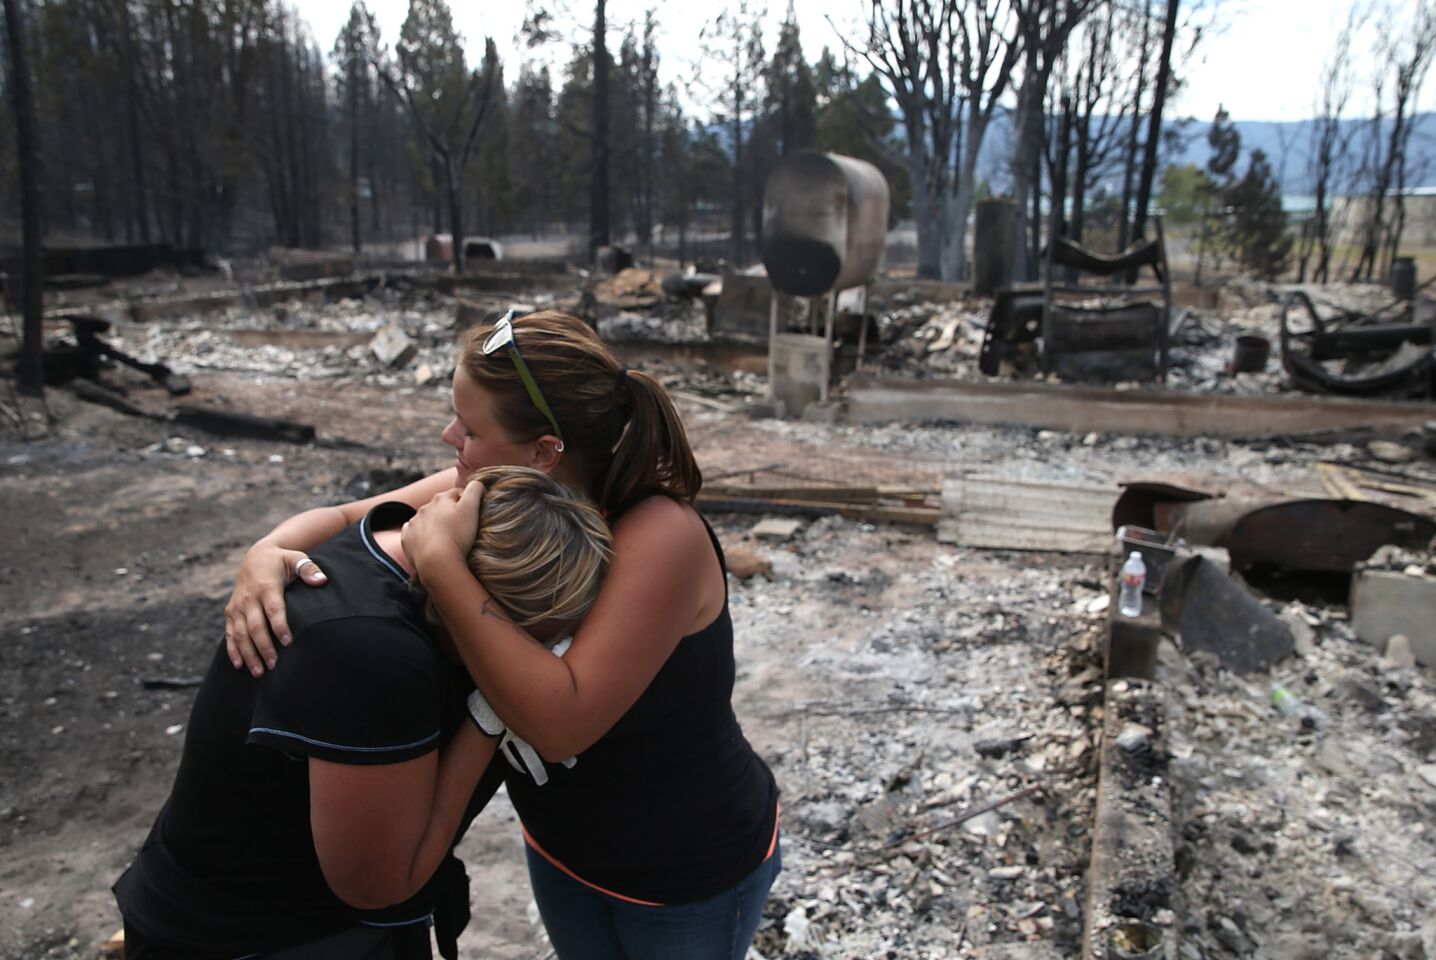 Kathy Besk, left, cries with her daughter Shelley Besk as they stand in the burned-out ruins of their home in Weed, Calif.